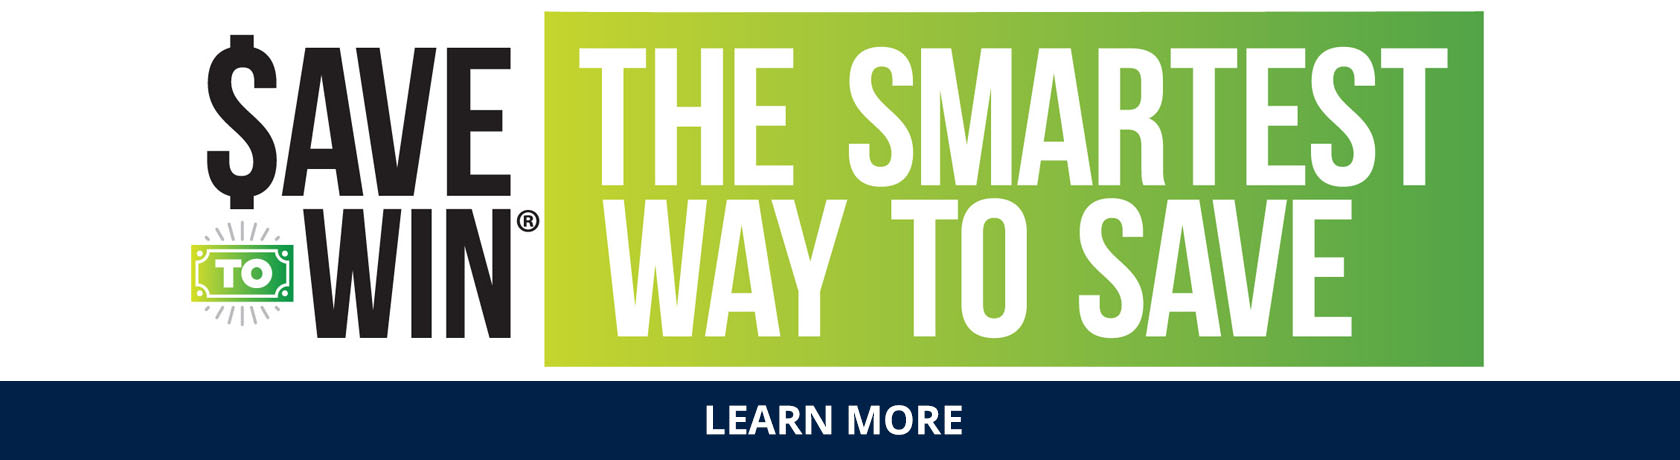 Save to Win!  The Smartest Way to Save.  Learn More.